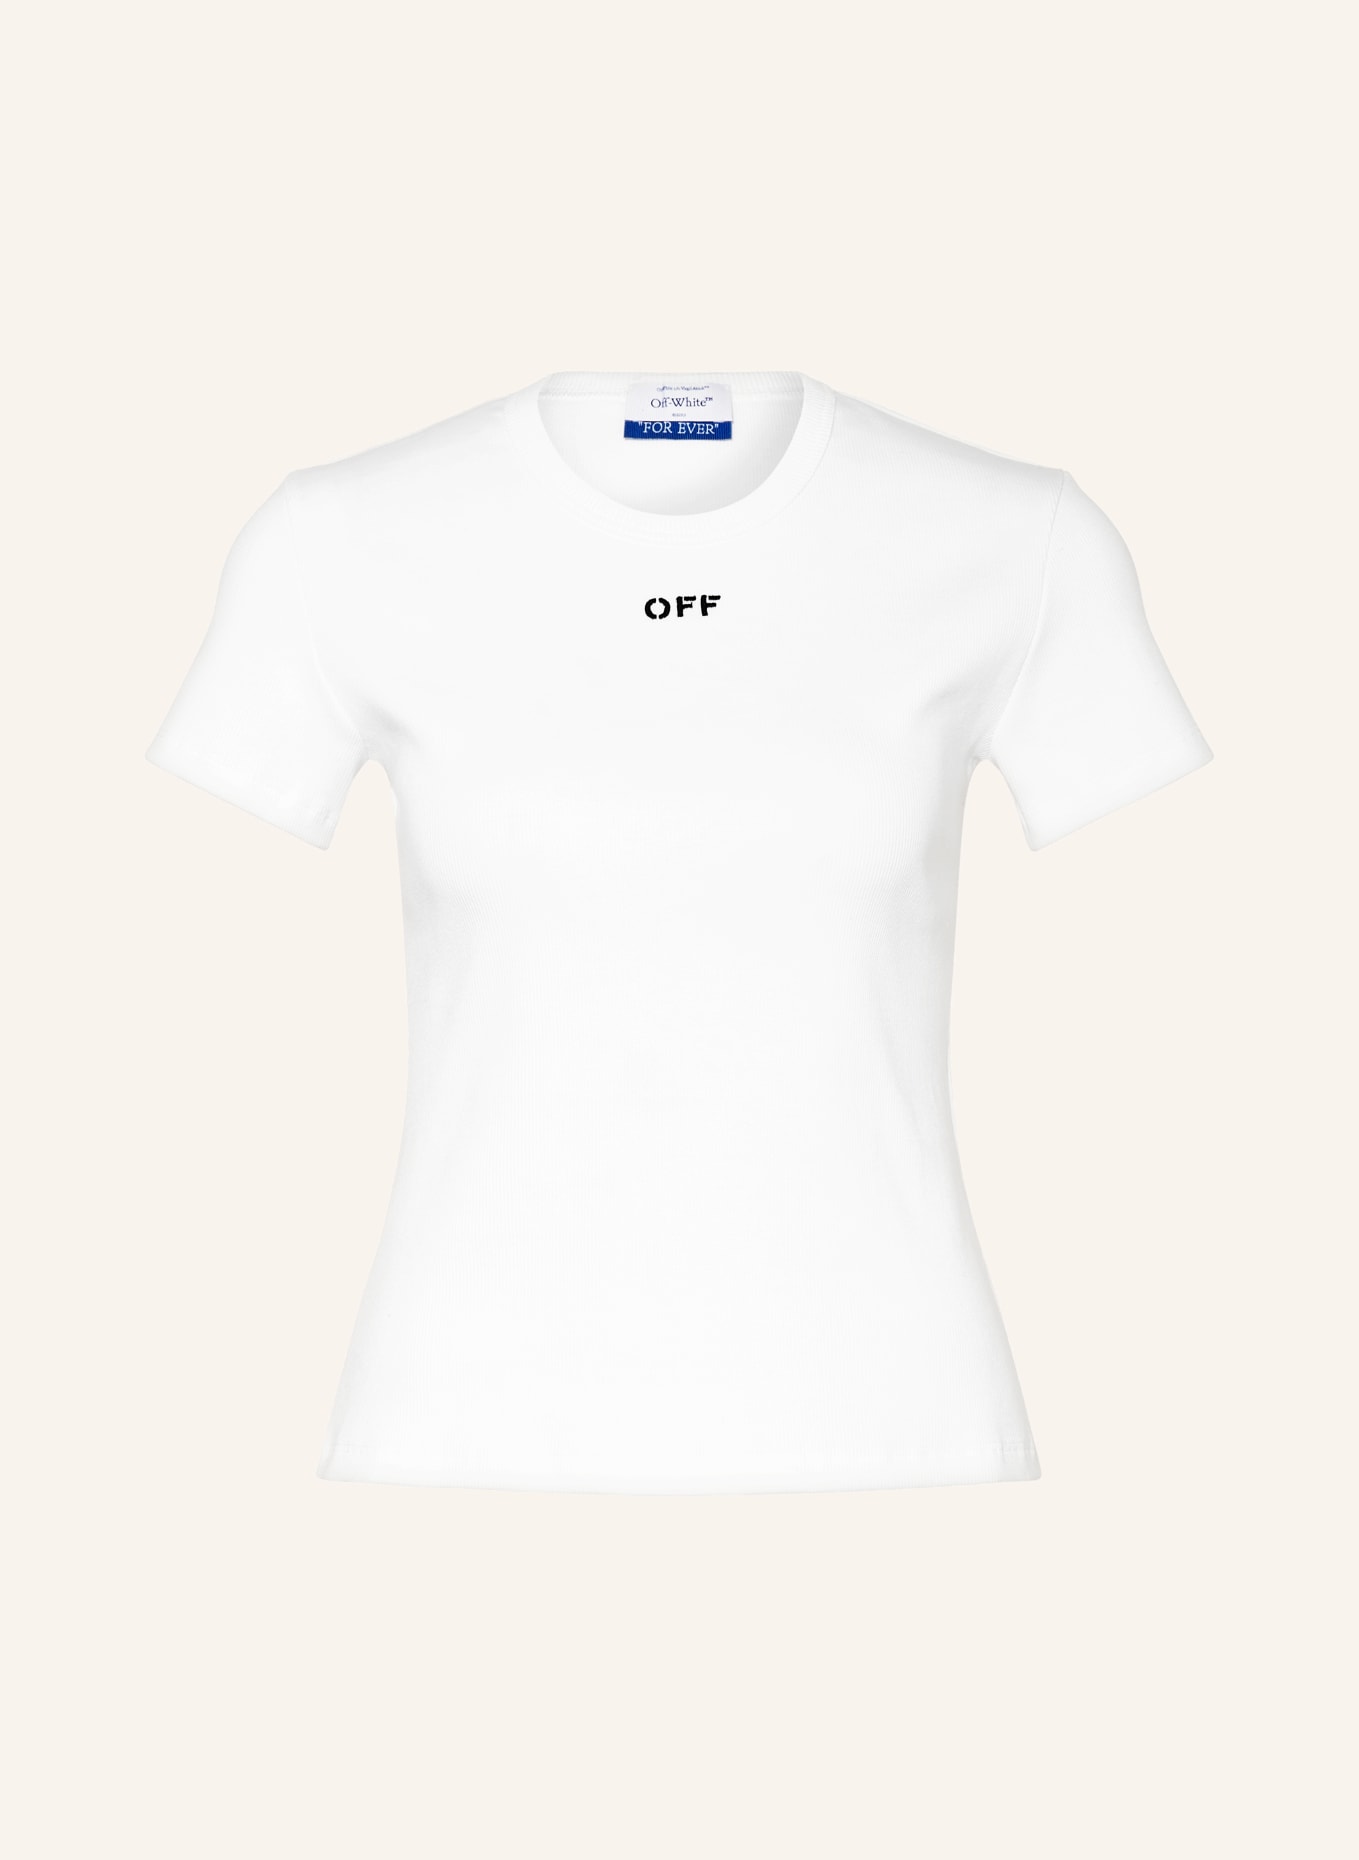 Off-White T-shirt, Color: WHITE (Image 1)